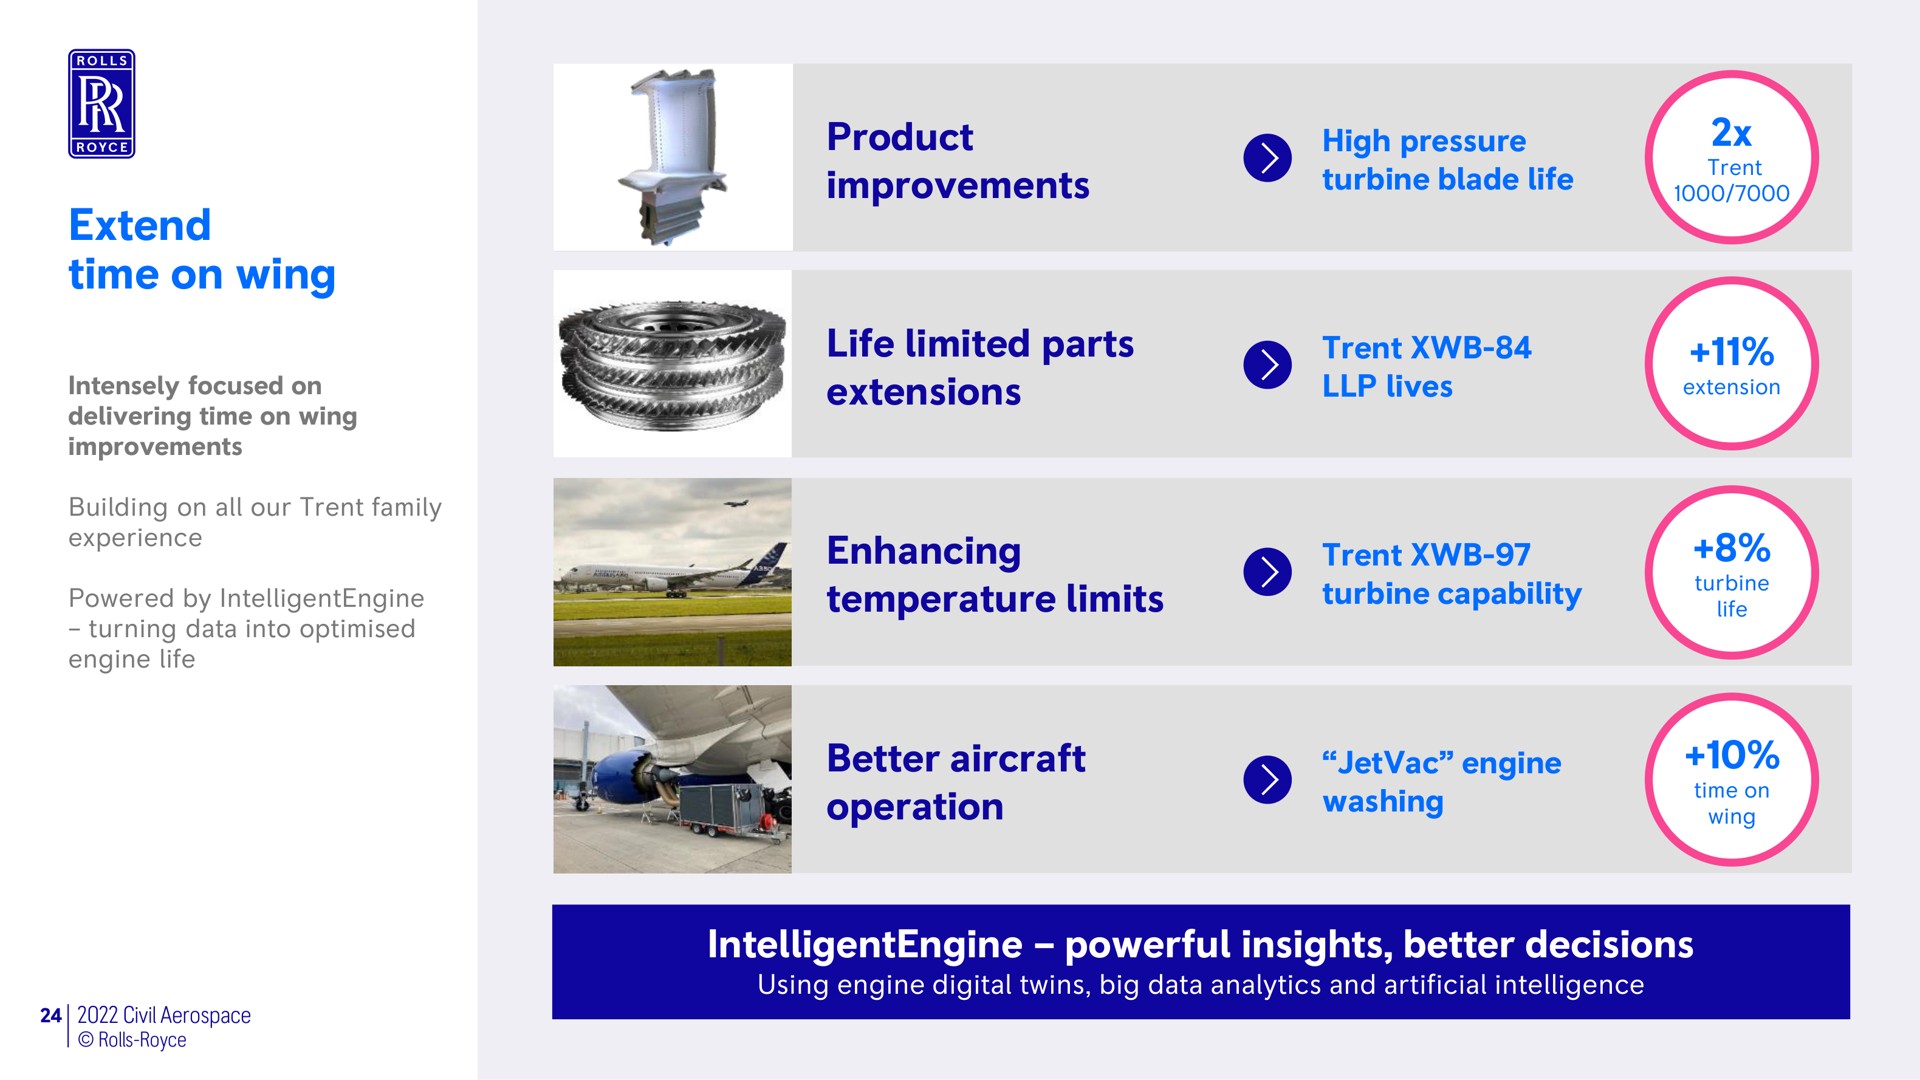 extend time on wing product improvements life limited parts extensions enhancing temperature limits better aircraft operation powerful insights better decisions | Rolls-Royce Holdings